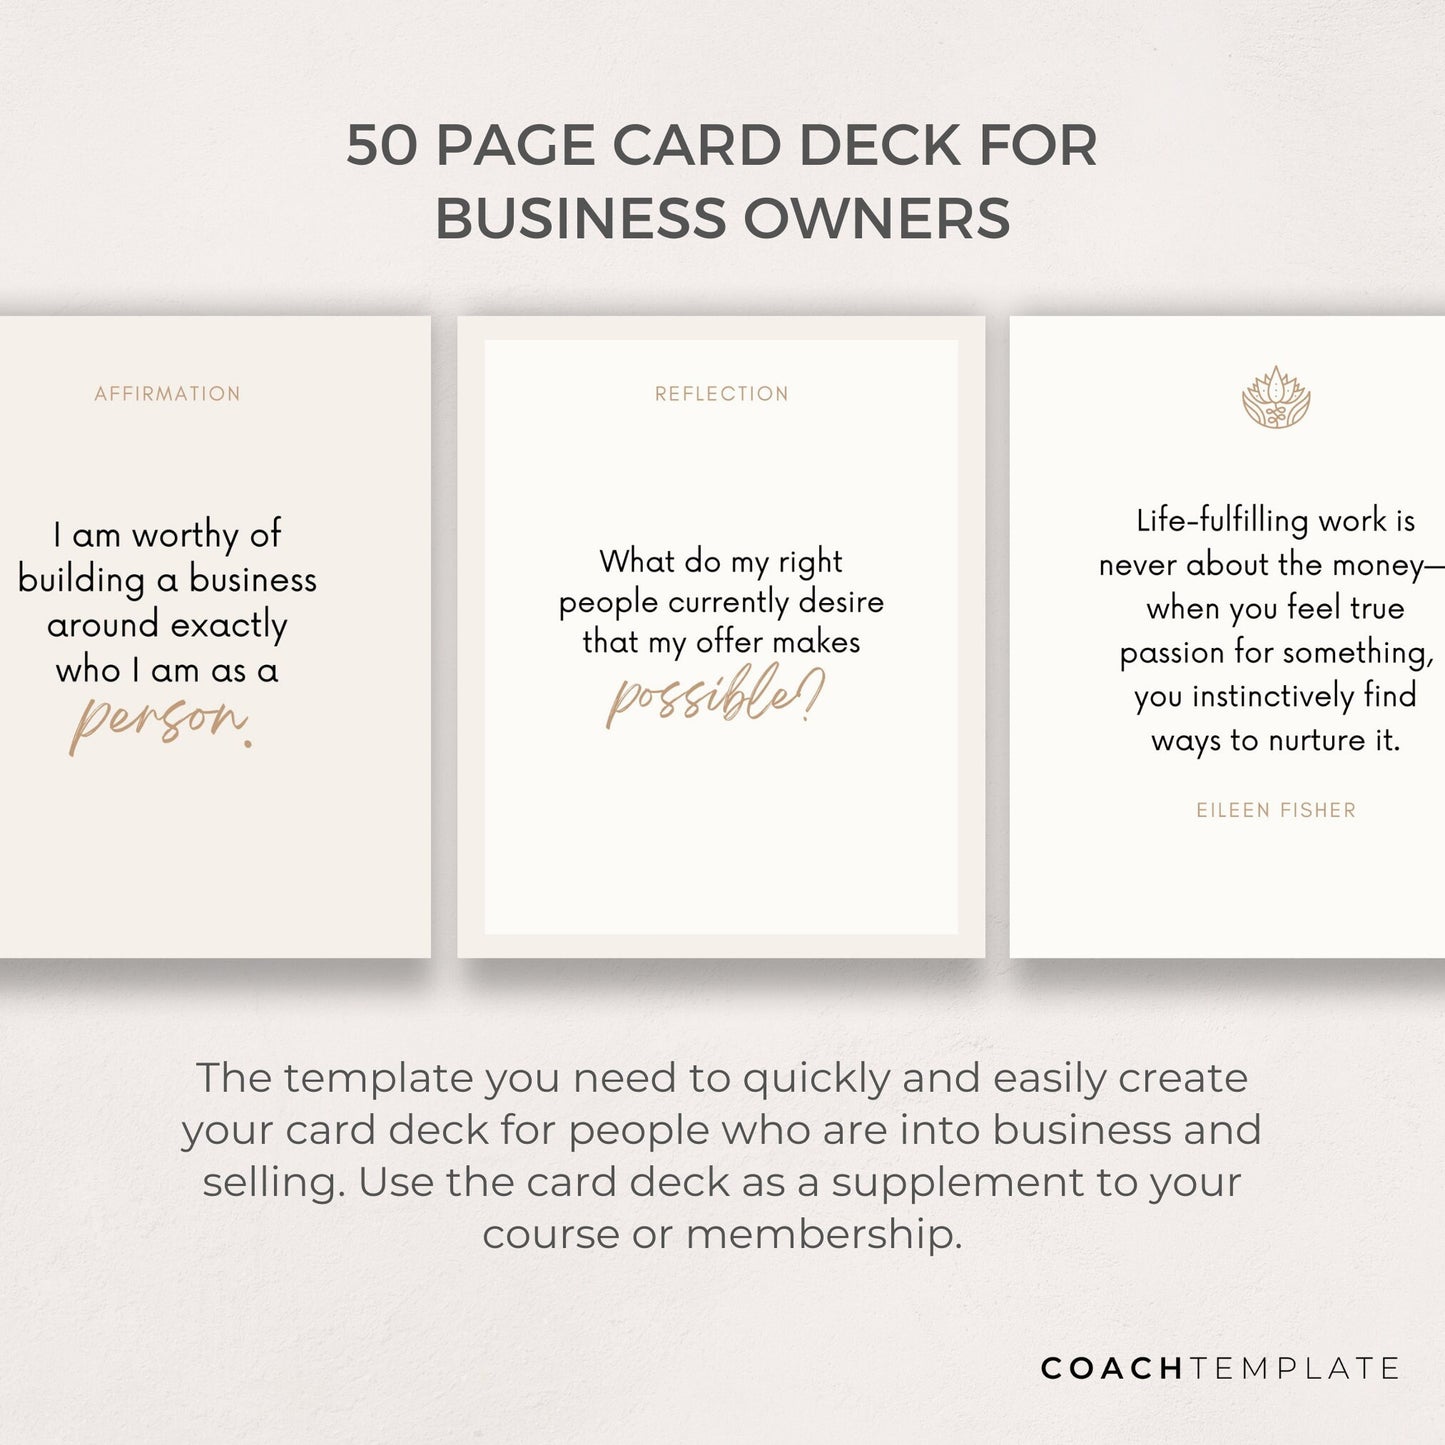 Card Deck Template for Coaching Business | Canva Template with Affirmations Motivational Quotes Activities Journal Prompts | Commercial Use 50 Card deck template for coaches and business owners. By CoachTemplate.com CT059